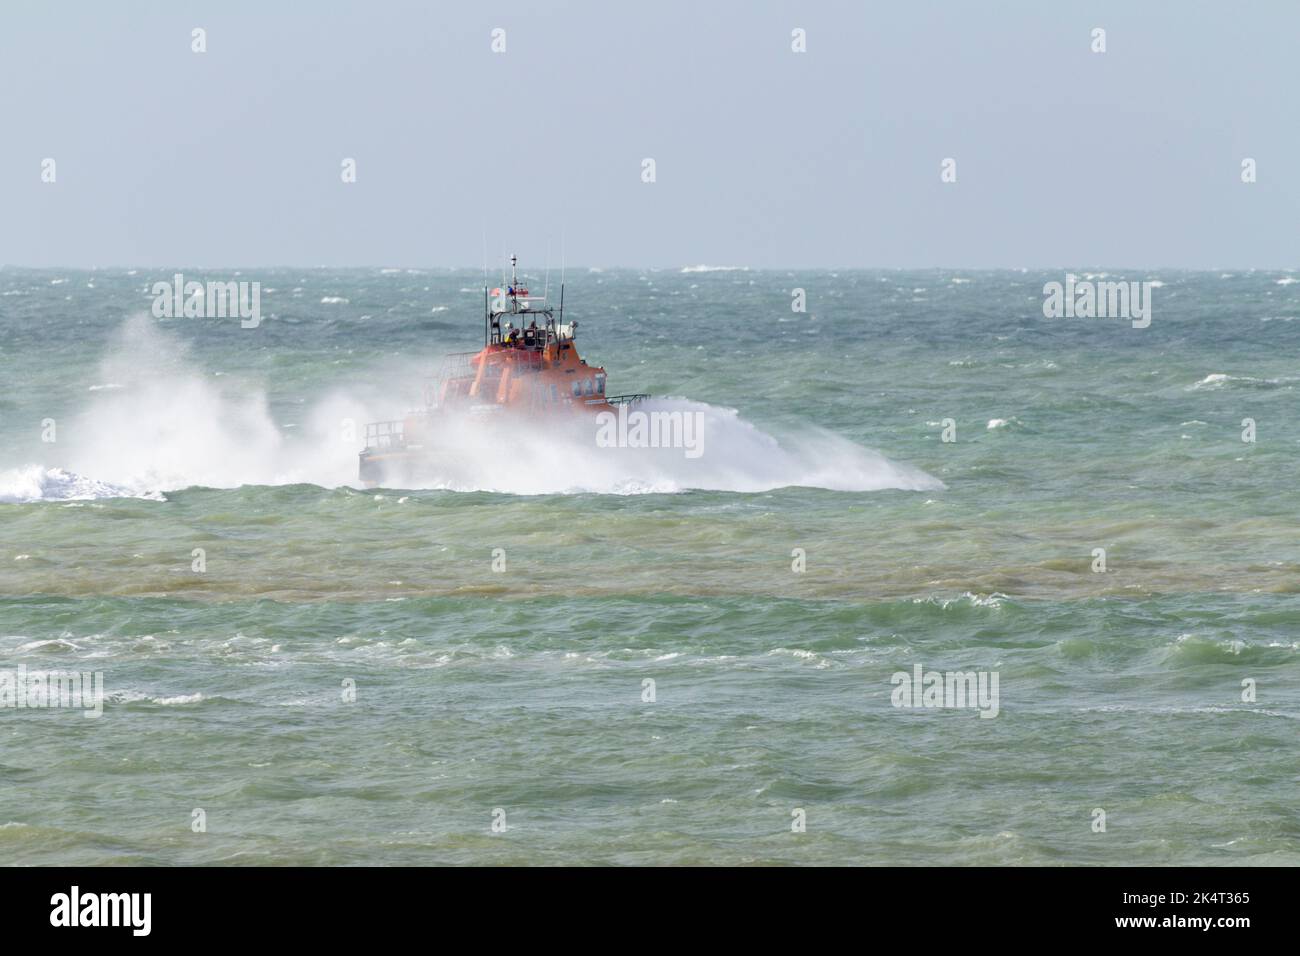 Newhaven lifeboat orange and blue going out to sea with high winds and sea spray around the vessel strong waves also rocking the boat Stock Photo